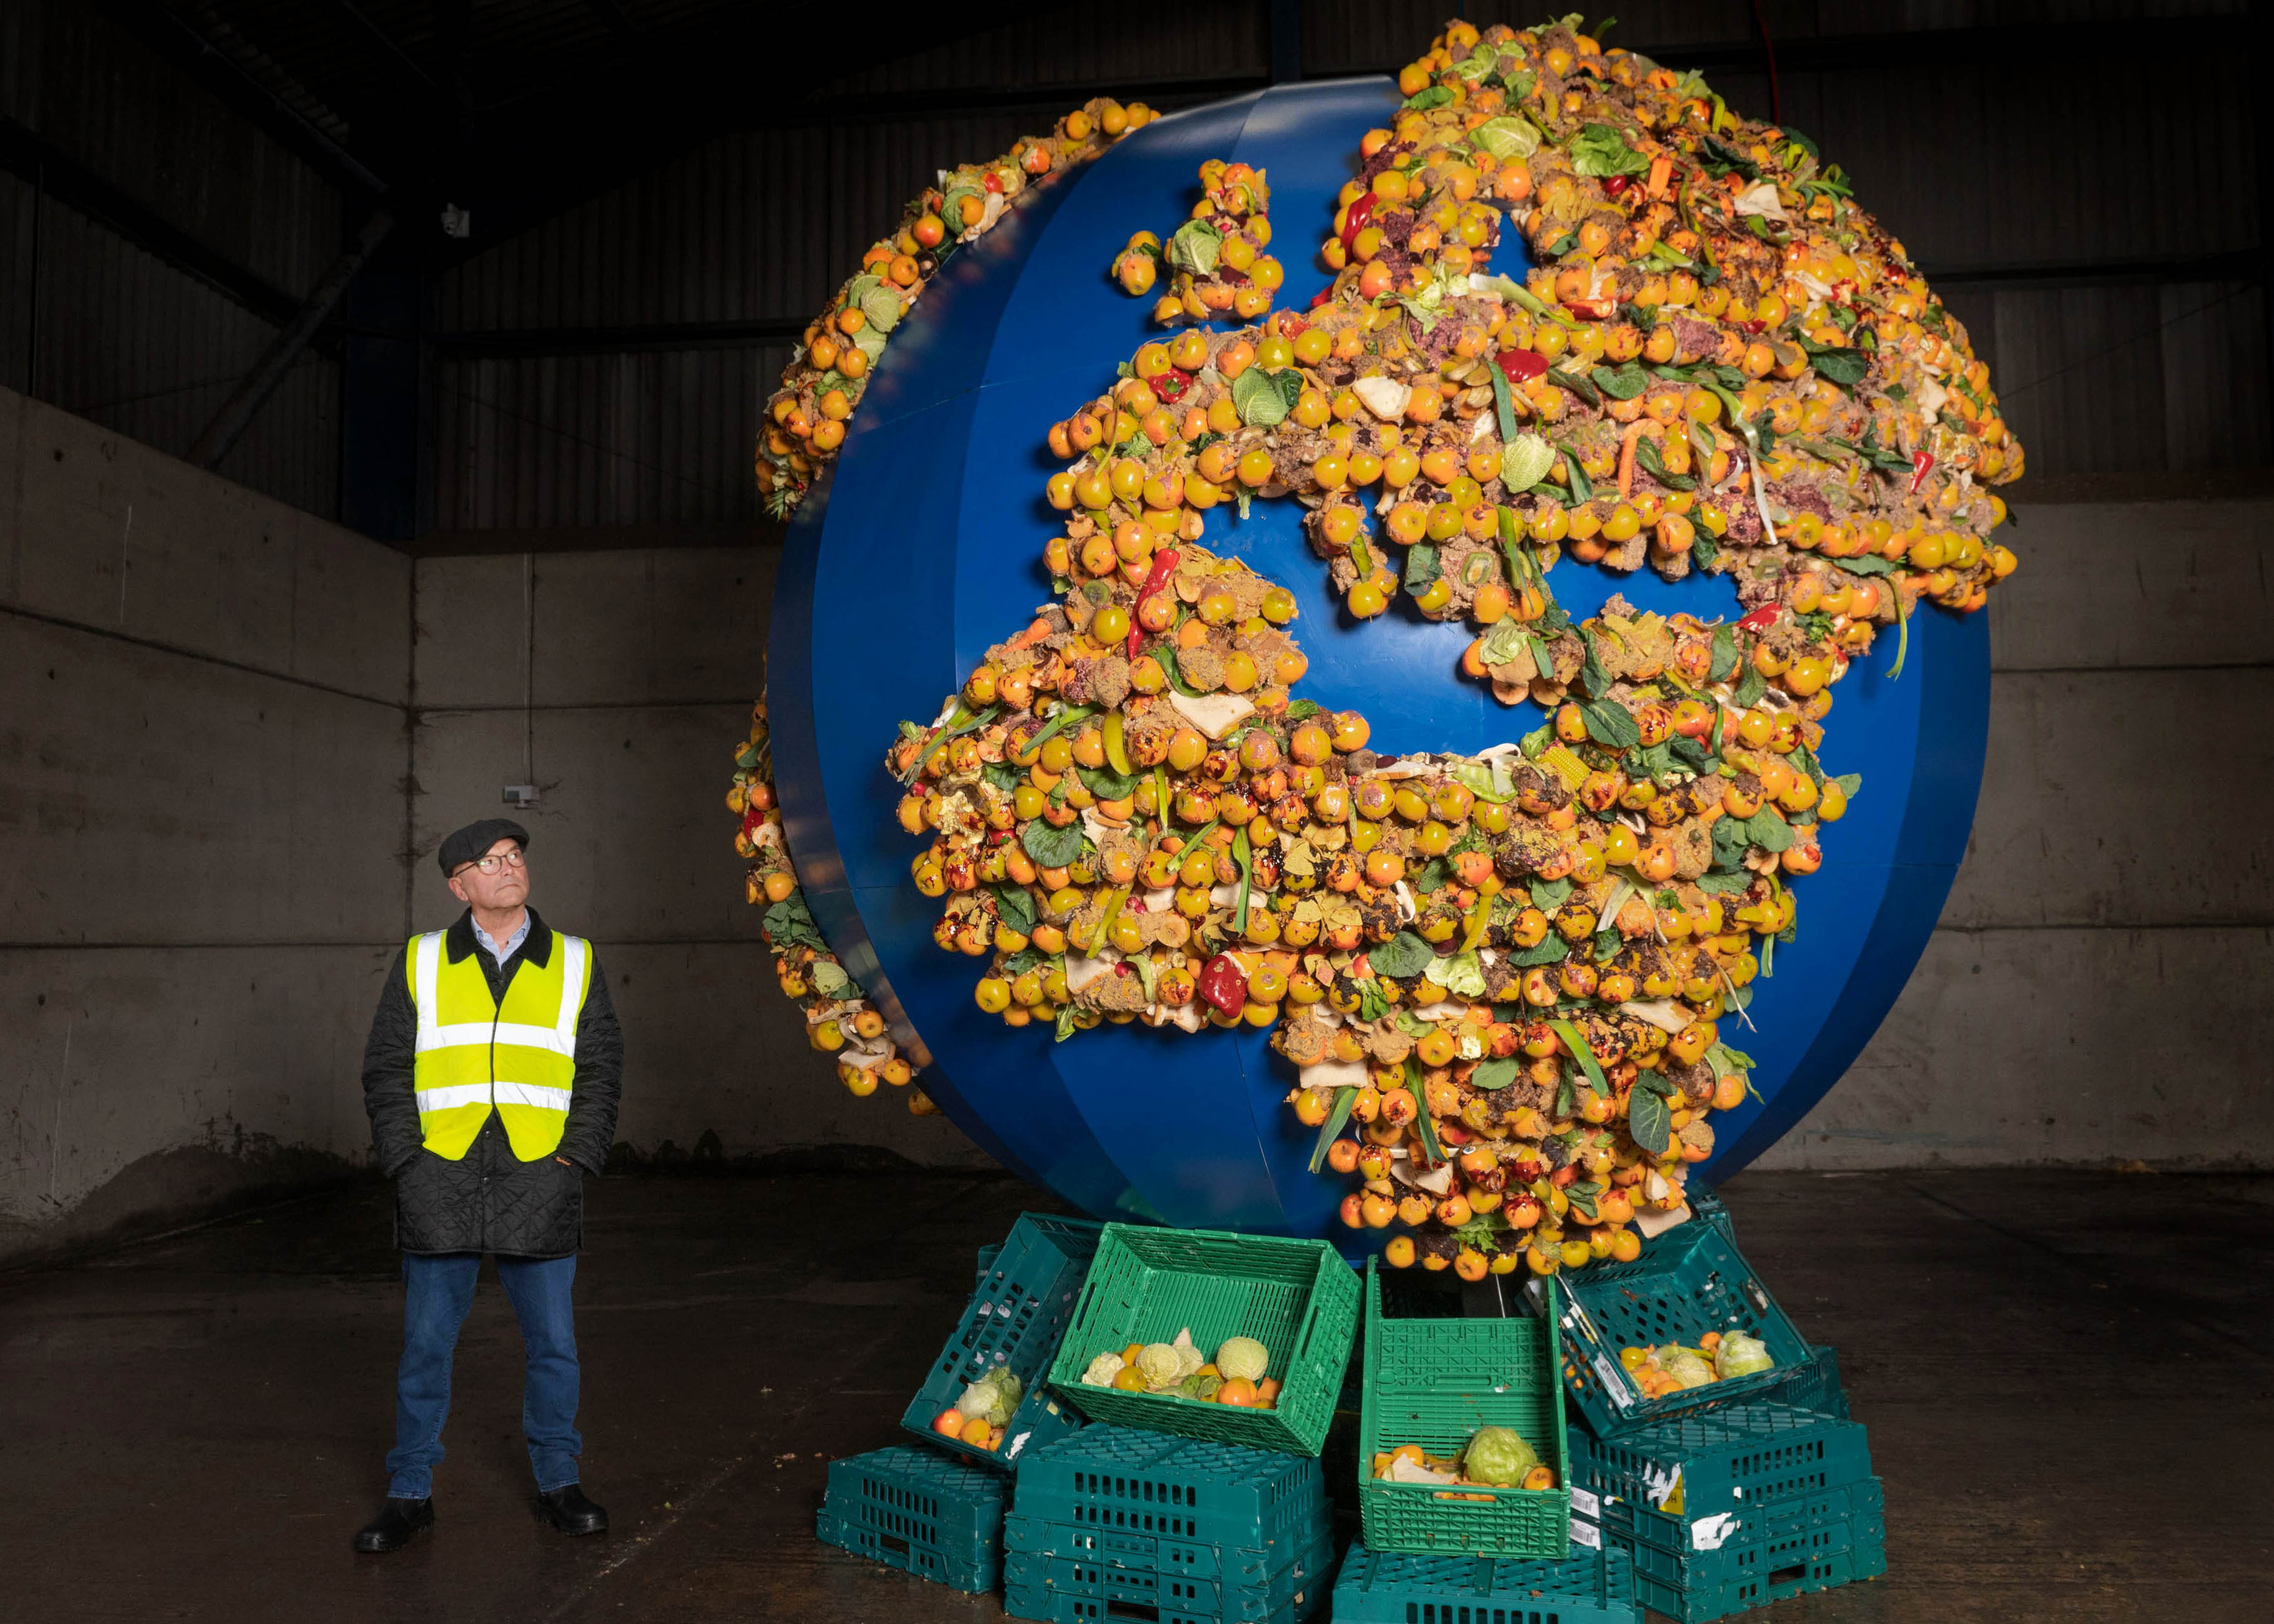 Gregg Wallace poses next to an installation made from the food waste from a single UK household over a year